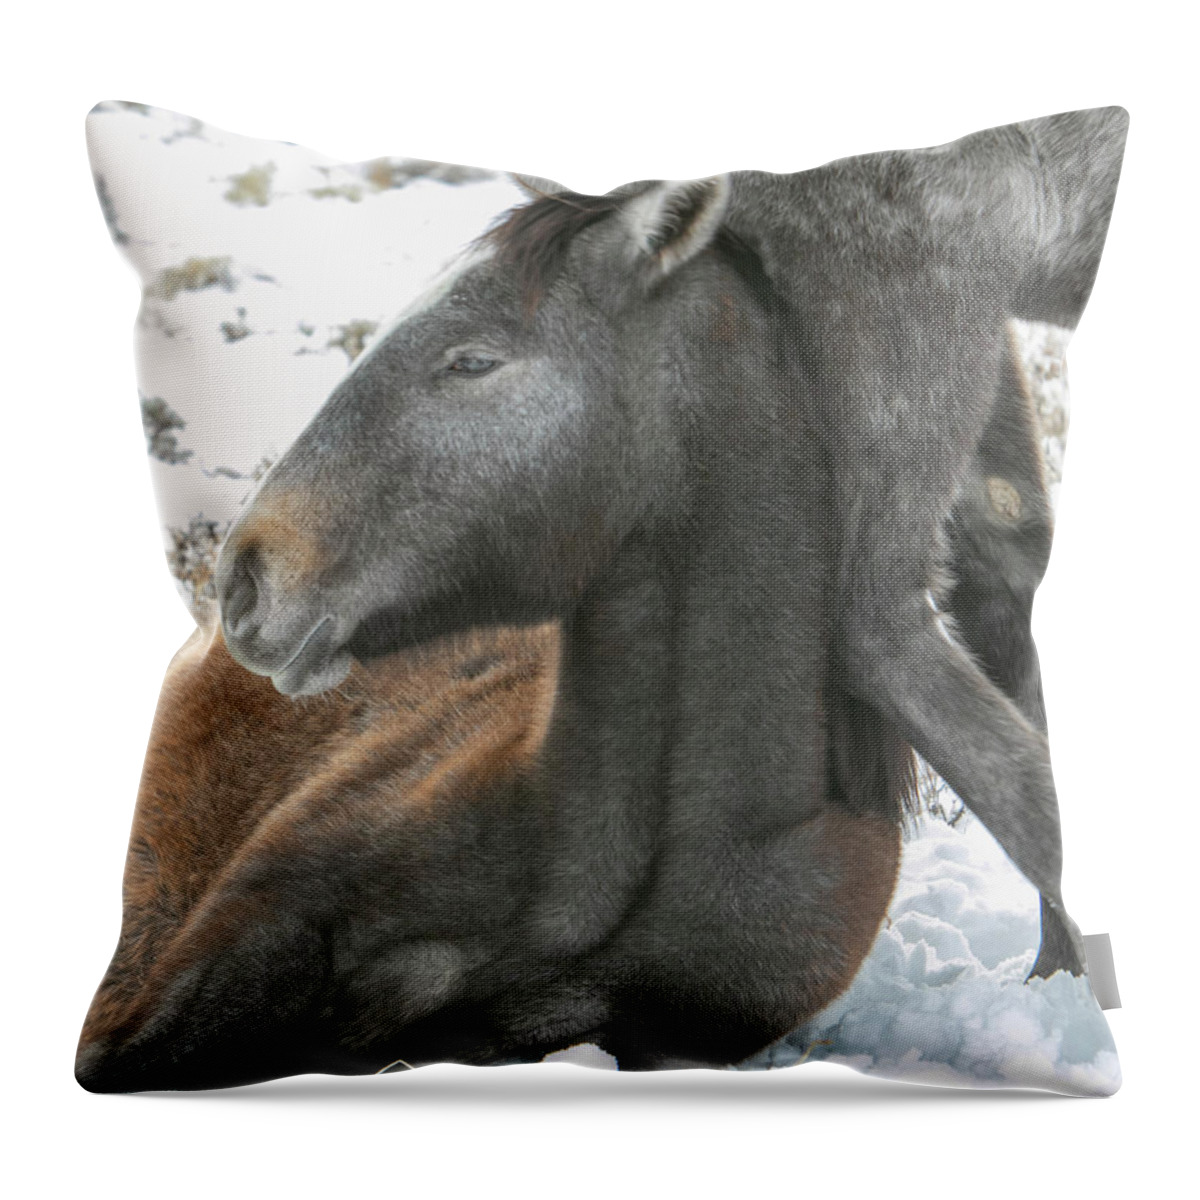 Horse Throw Pillow featuring the photograph Leaning On Mom by Kent Keller